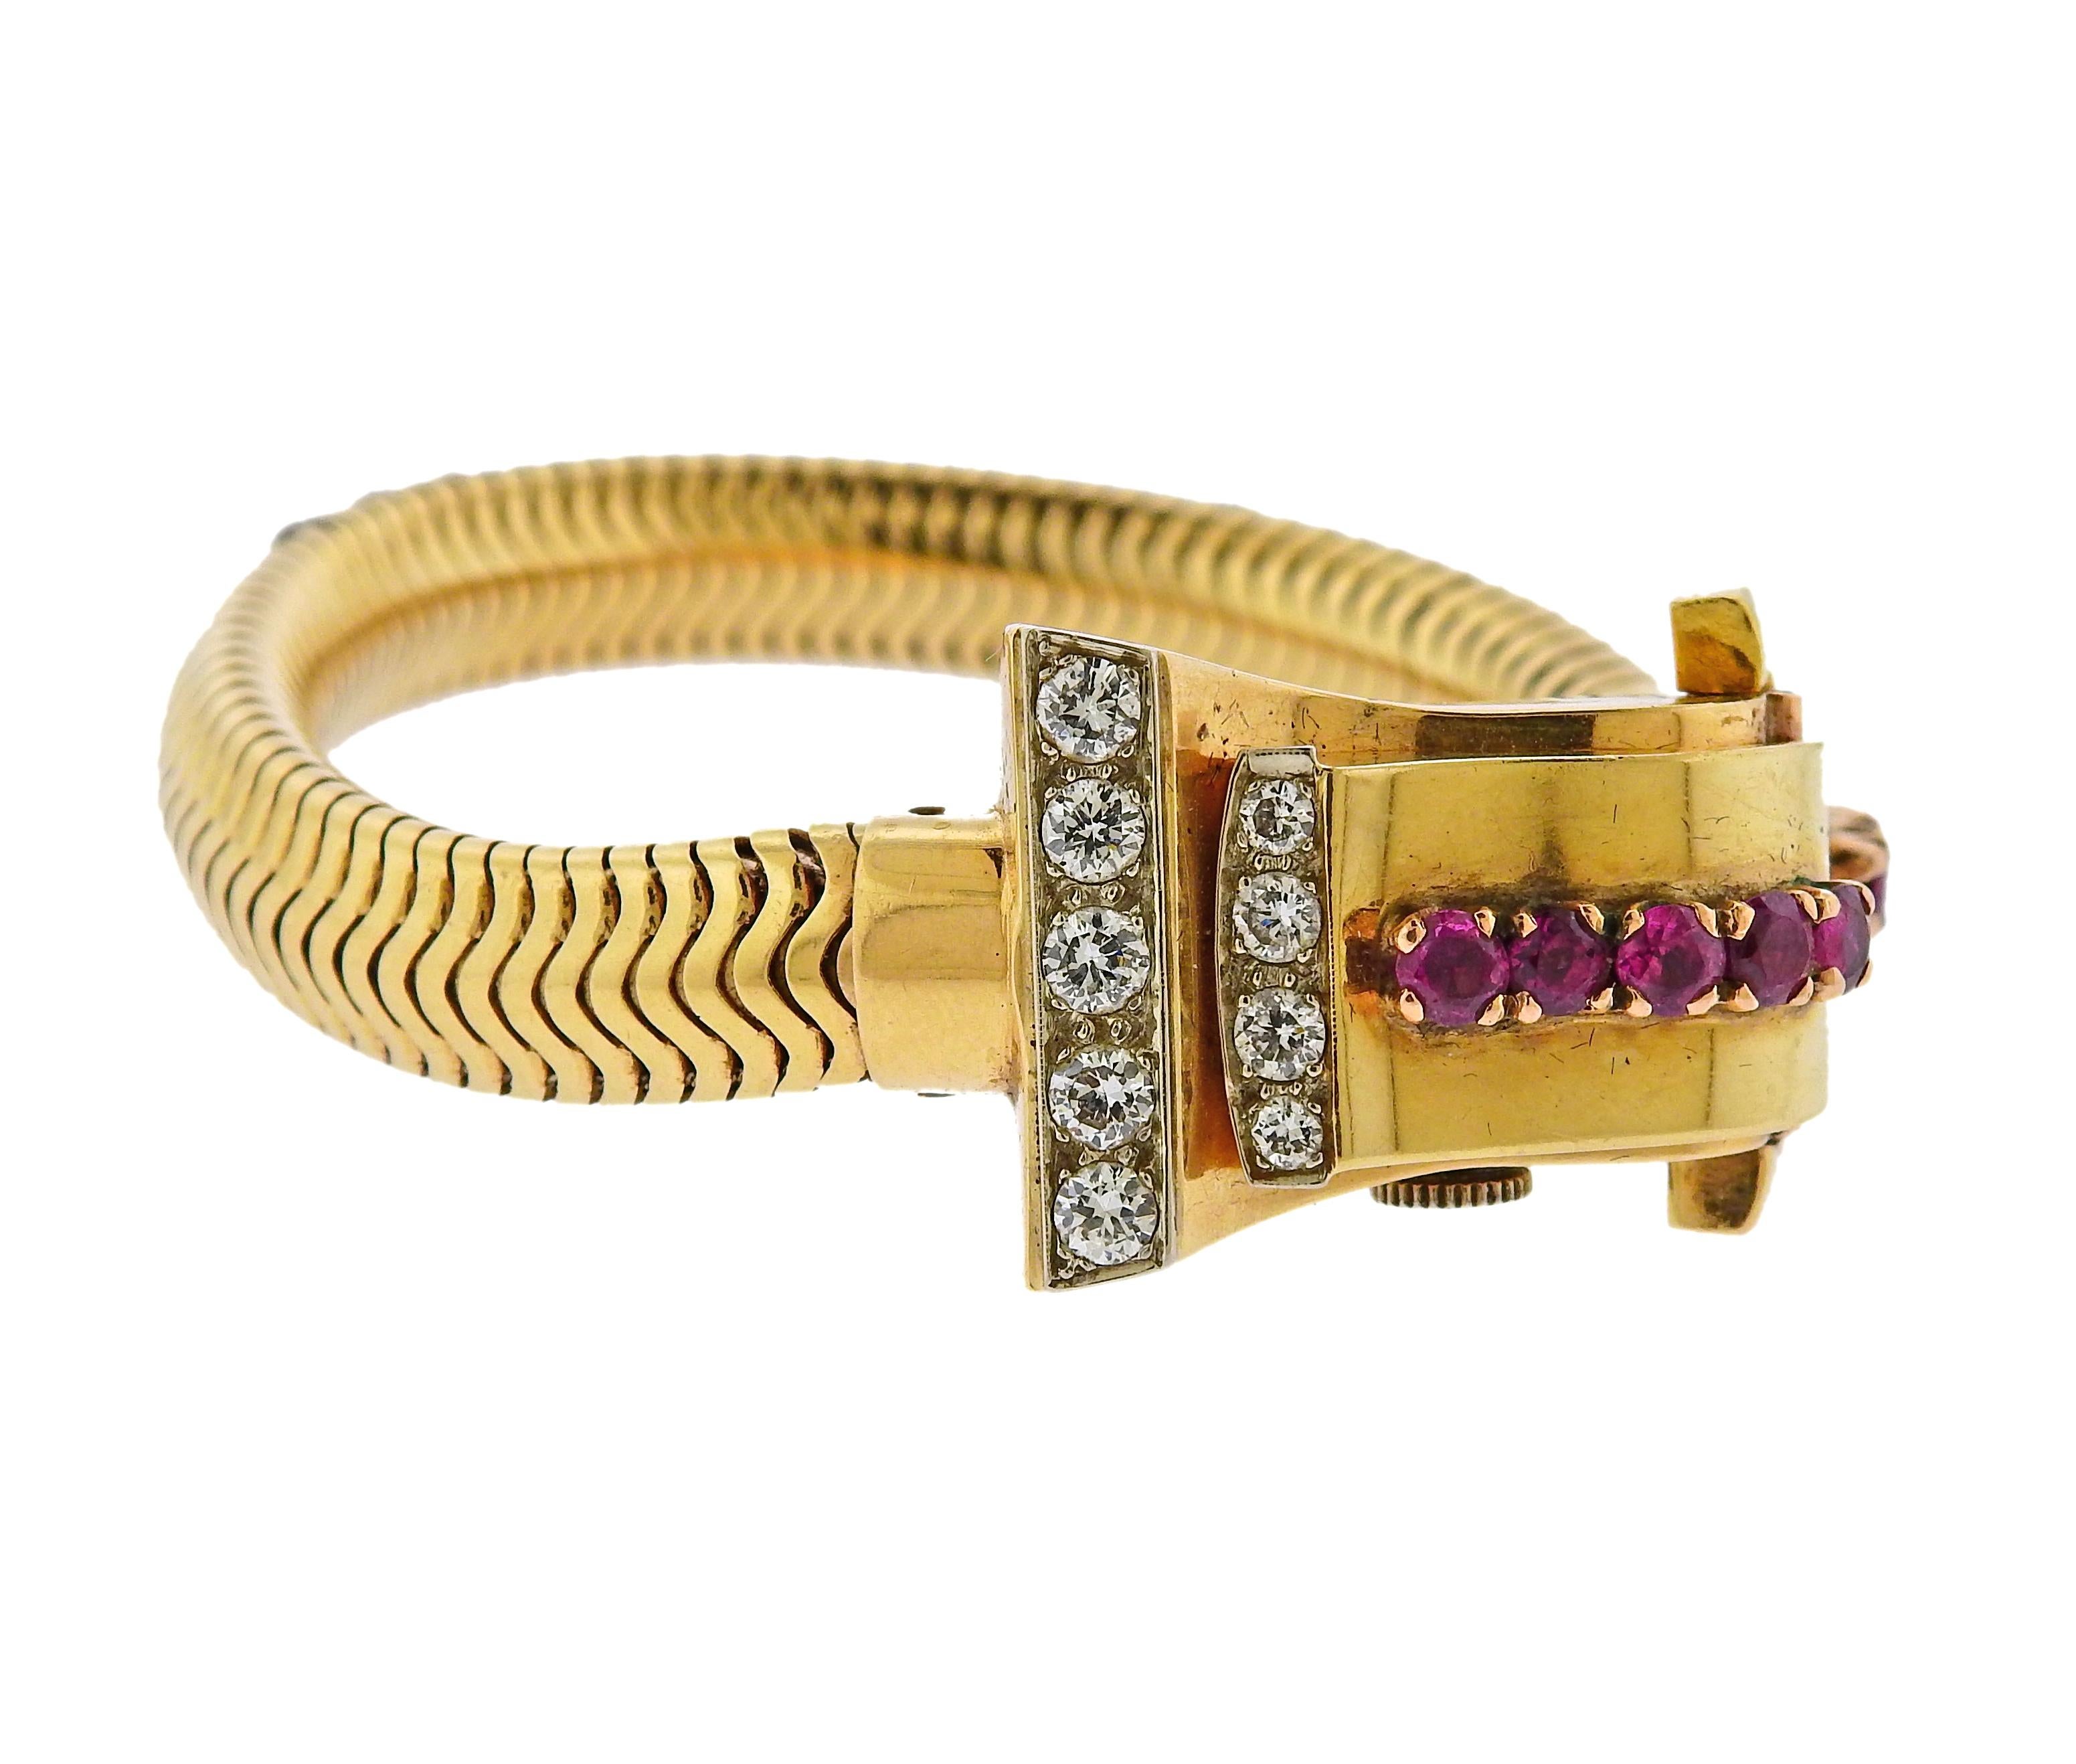 Retro circa 1940s iconic design watch bracelet, adorned with rubies, and approx. 1.12ctw in diamonds. The bracelet is 7.25